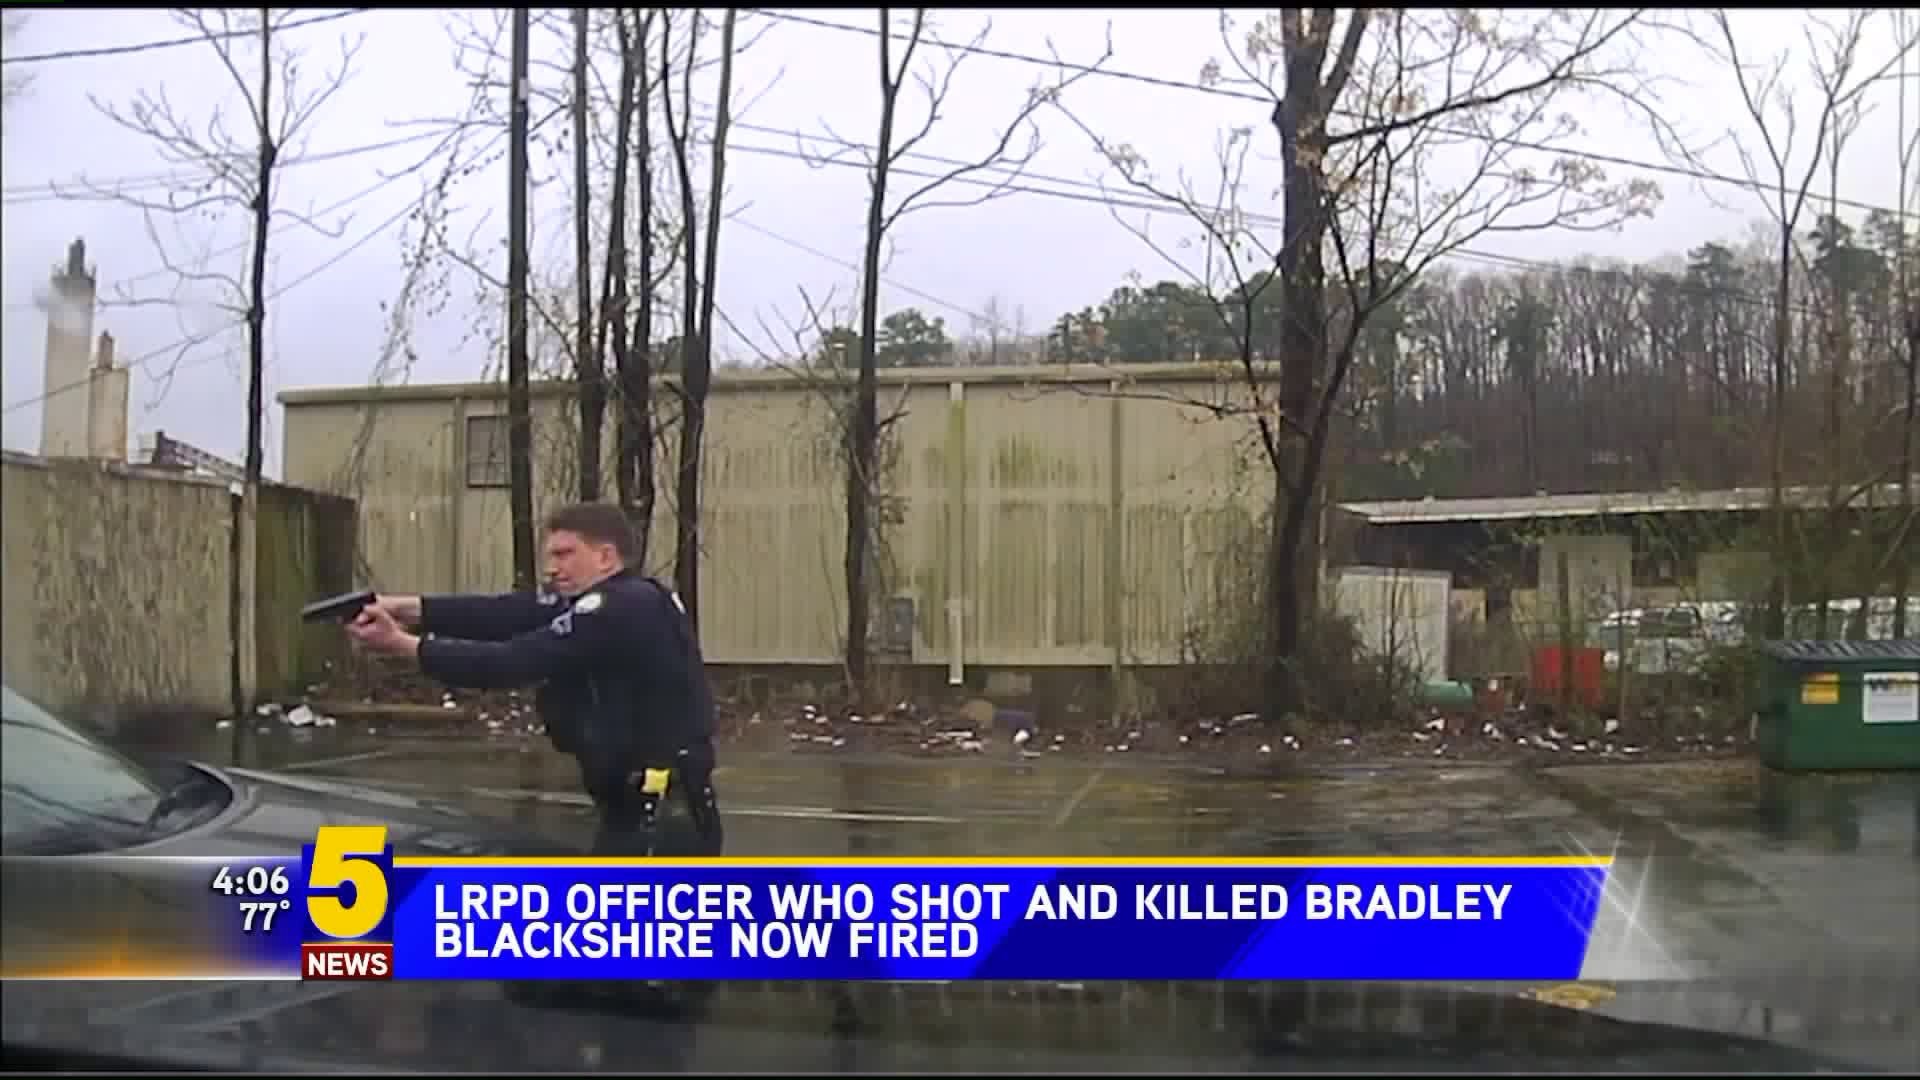 LRPD Officer Who Shot And Killed Bradley Blackshire Now Fired